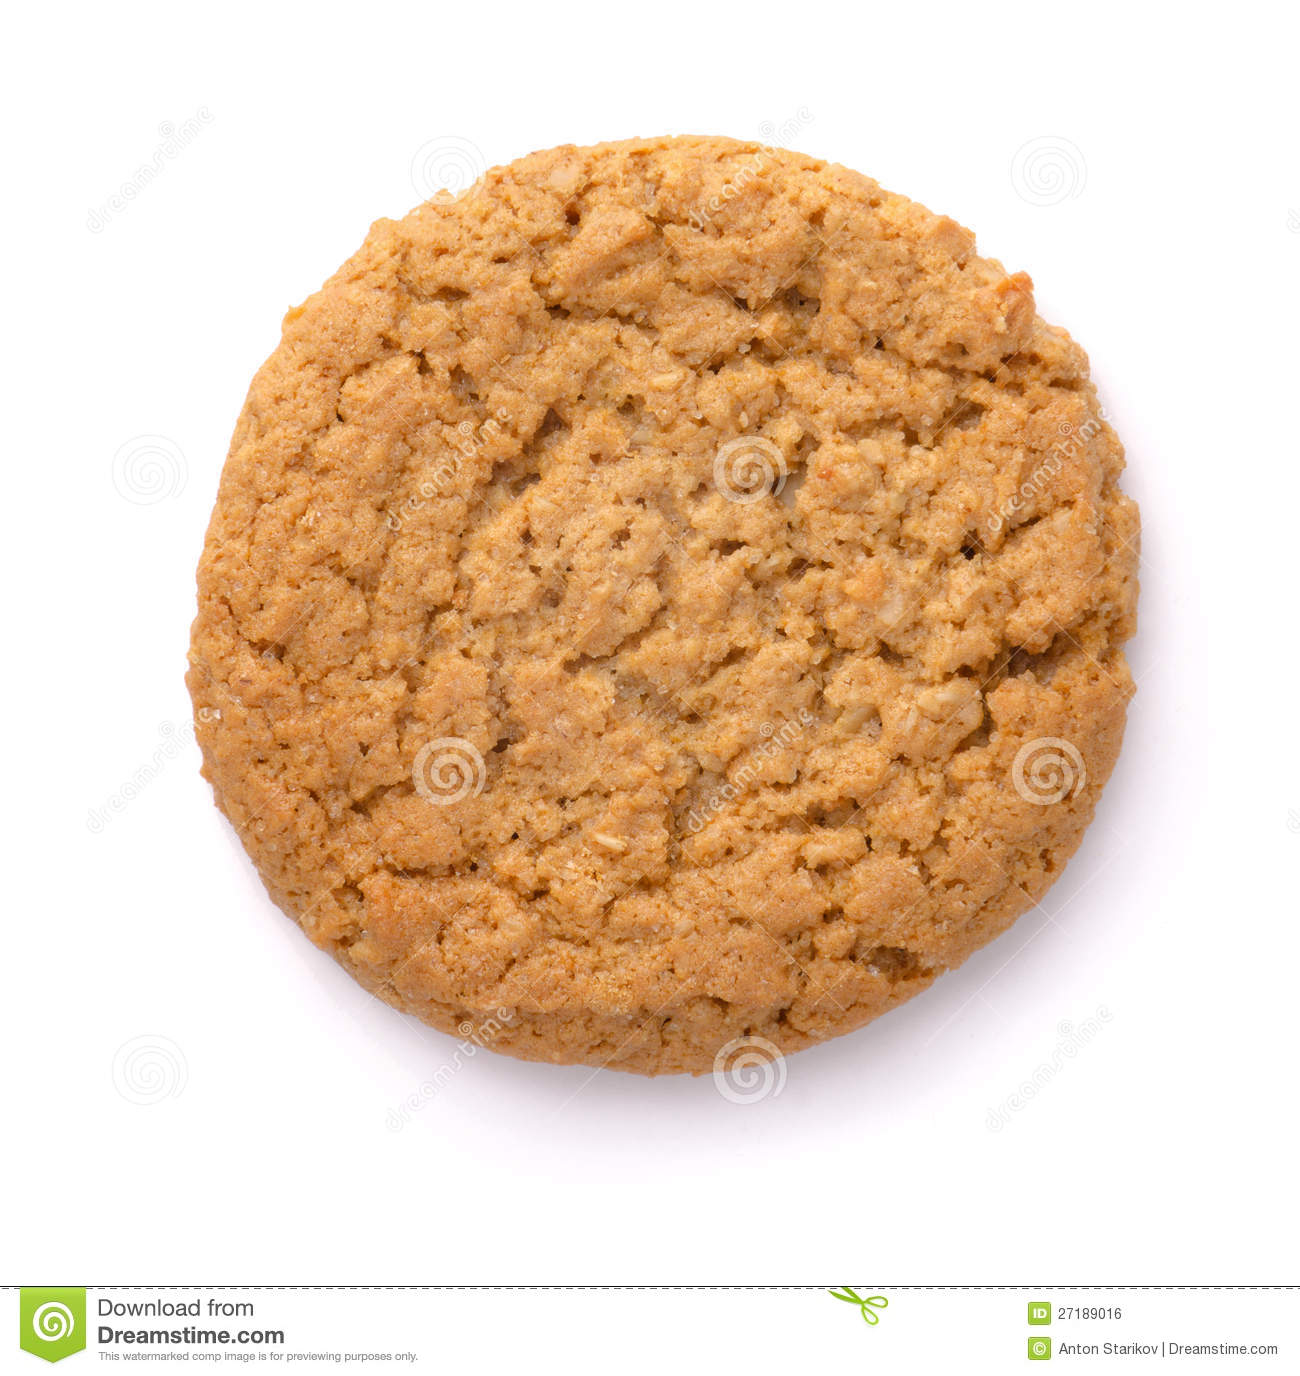 Oatmeal Cookie Royalty Free Stock Image   Image  27189016